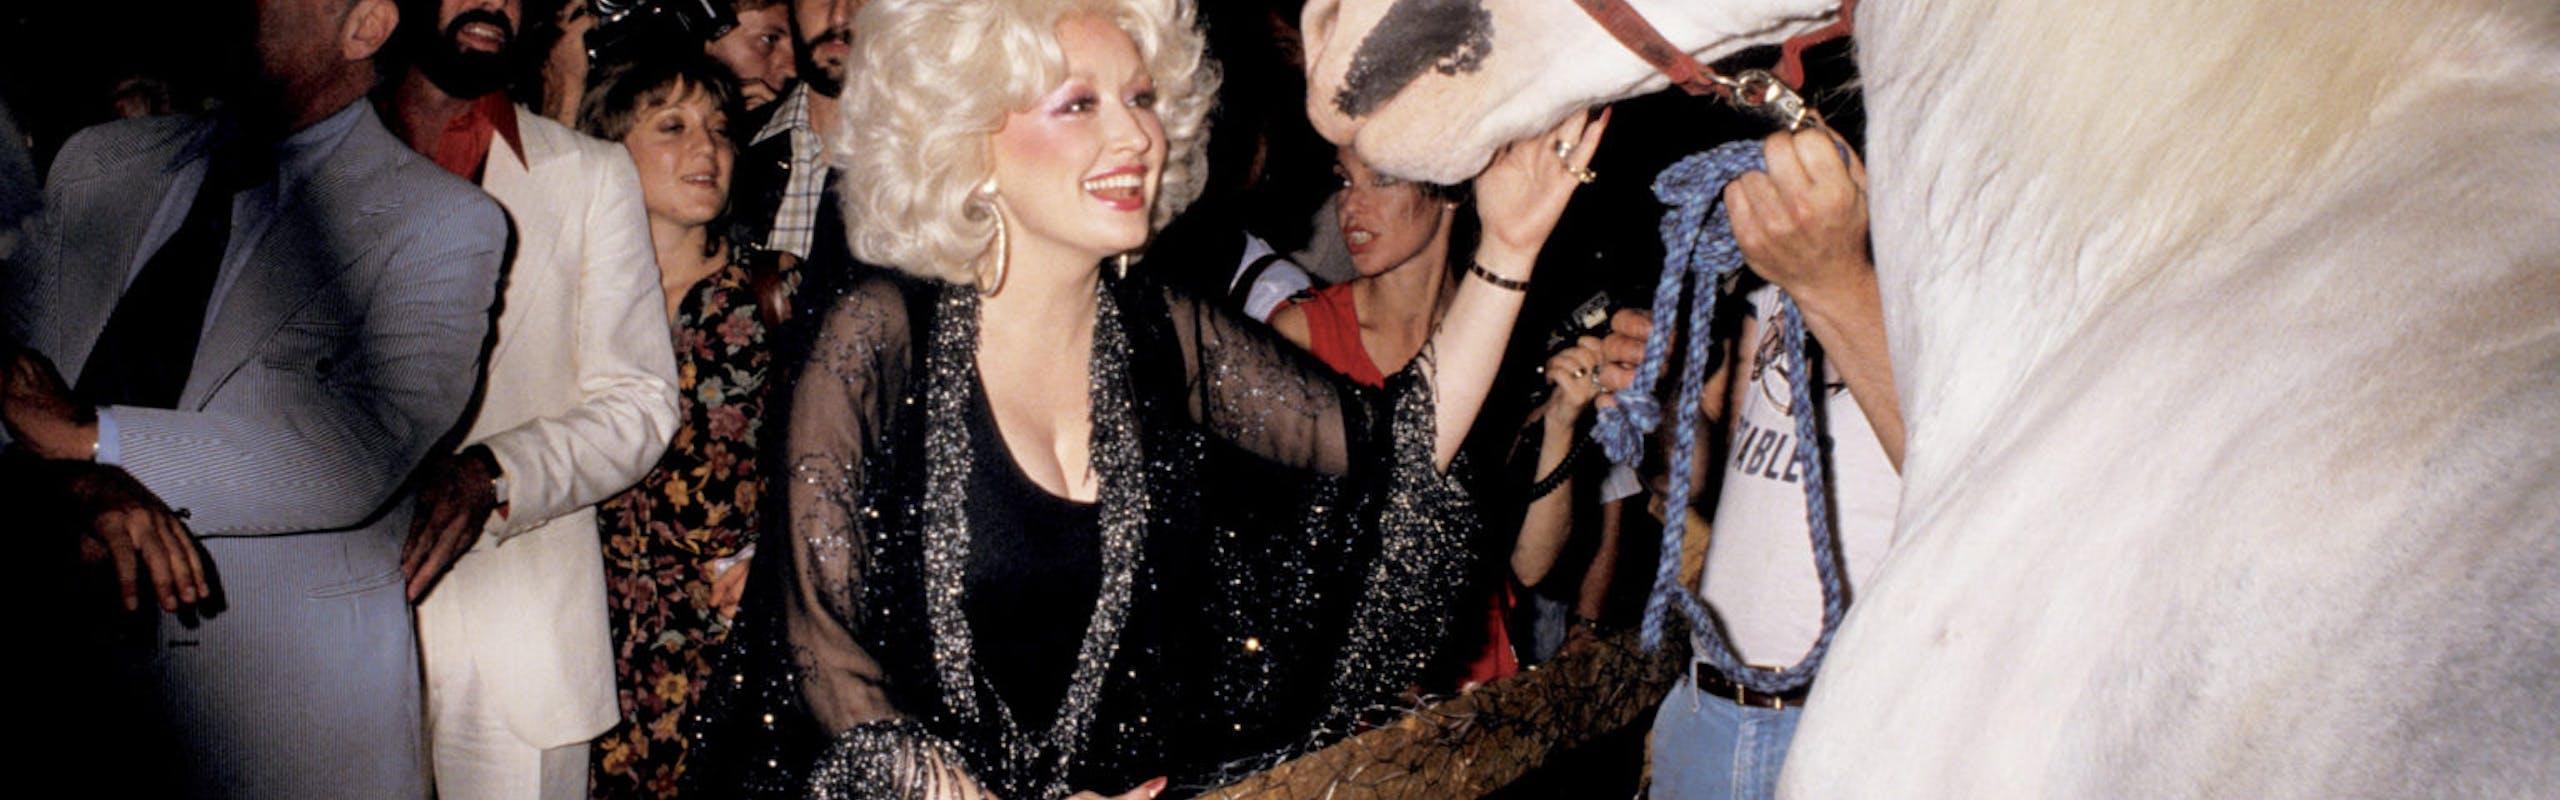 Dolly Parton petting a horse while partying at Studio 54.